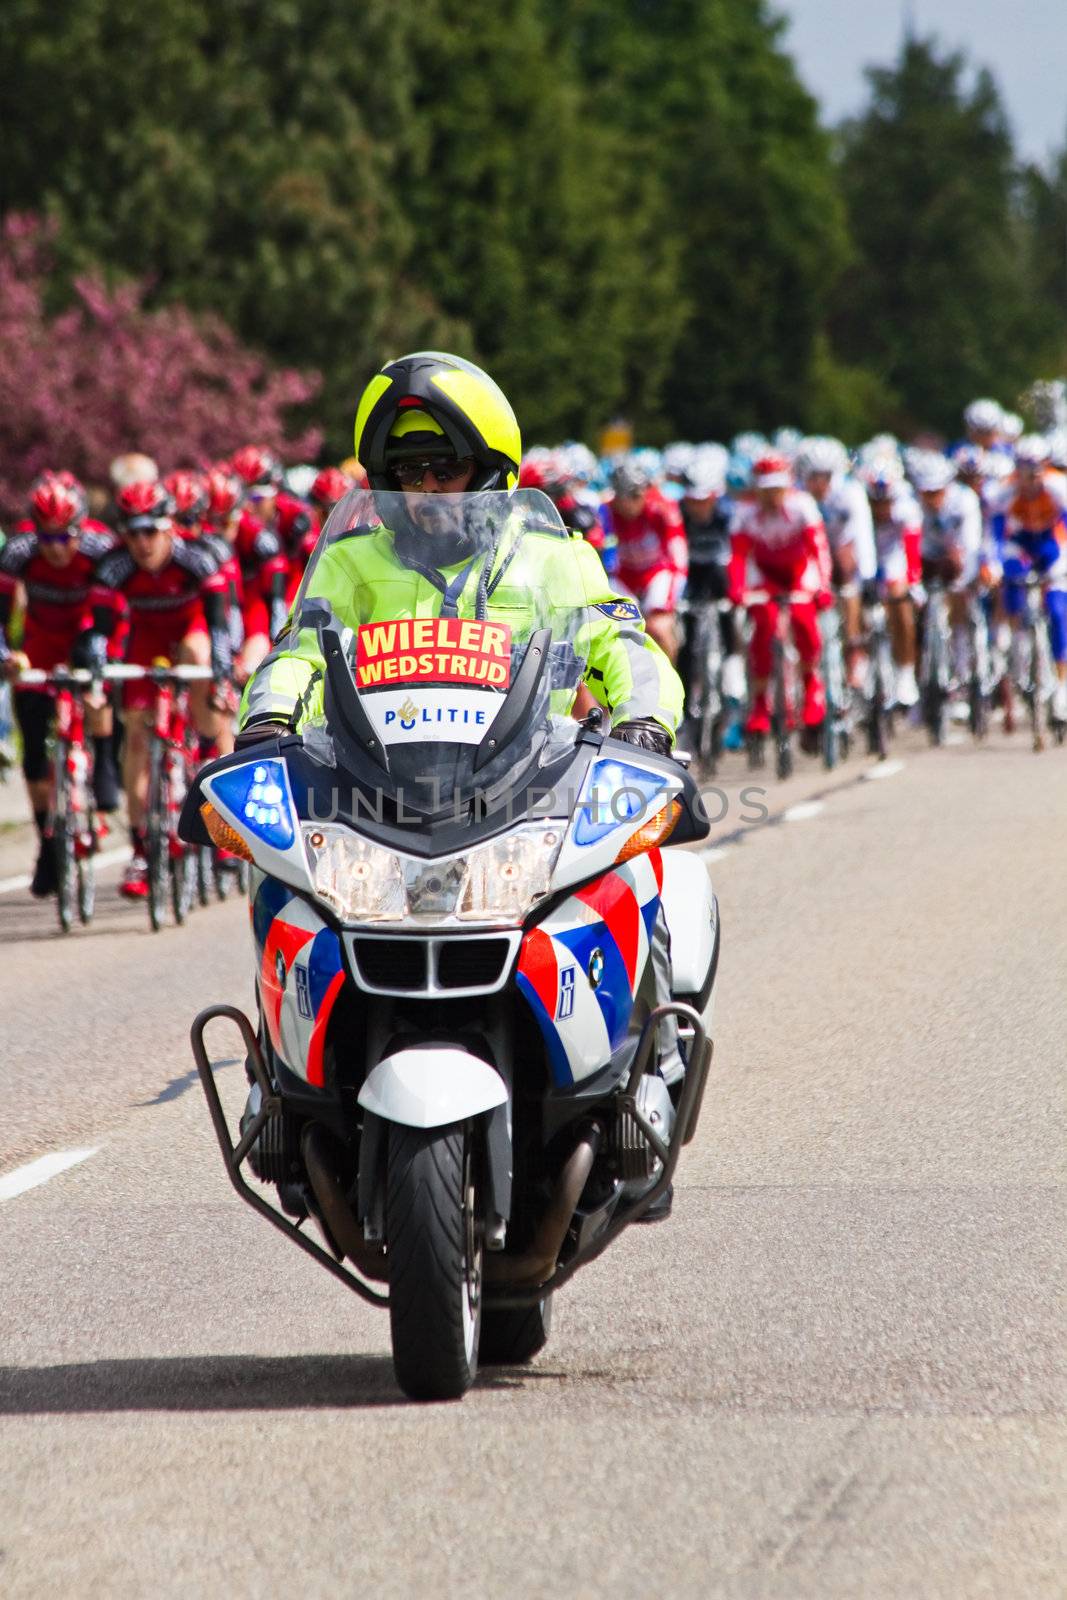 Competitors and following teams in the Giro d�Italia. by Colette